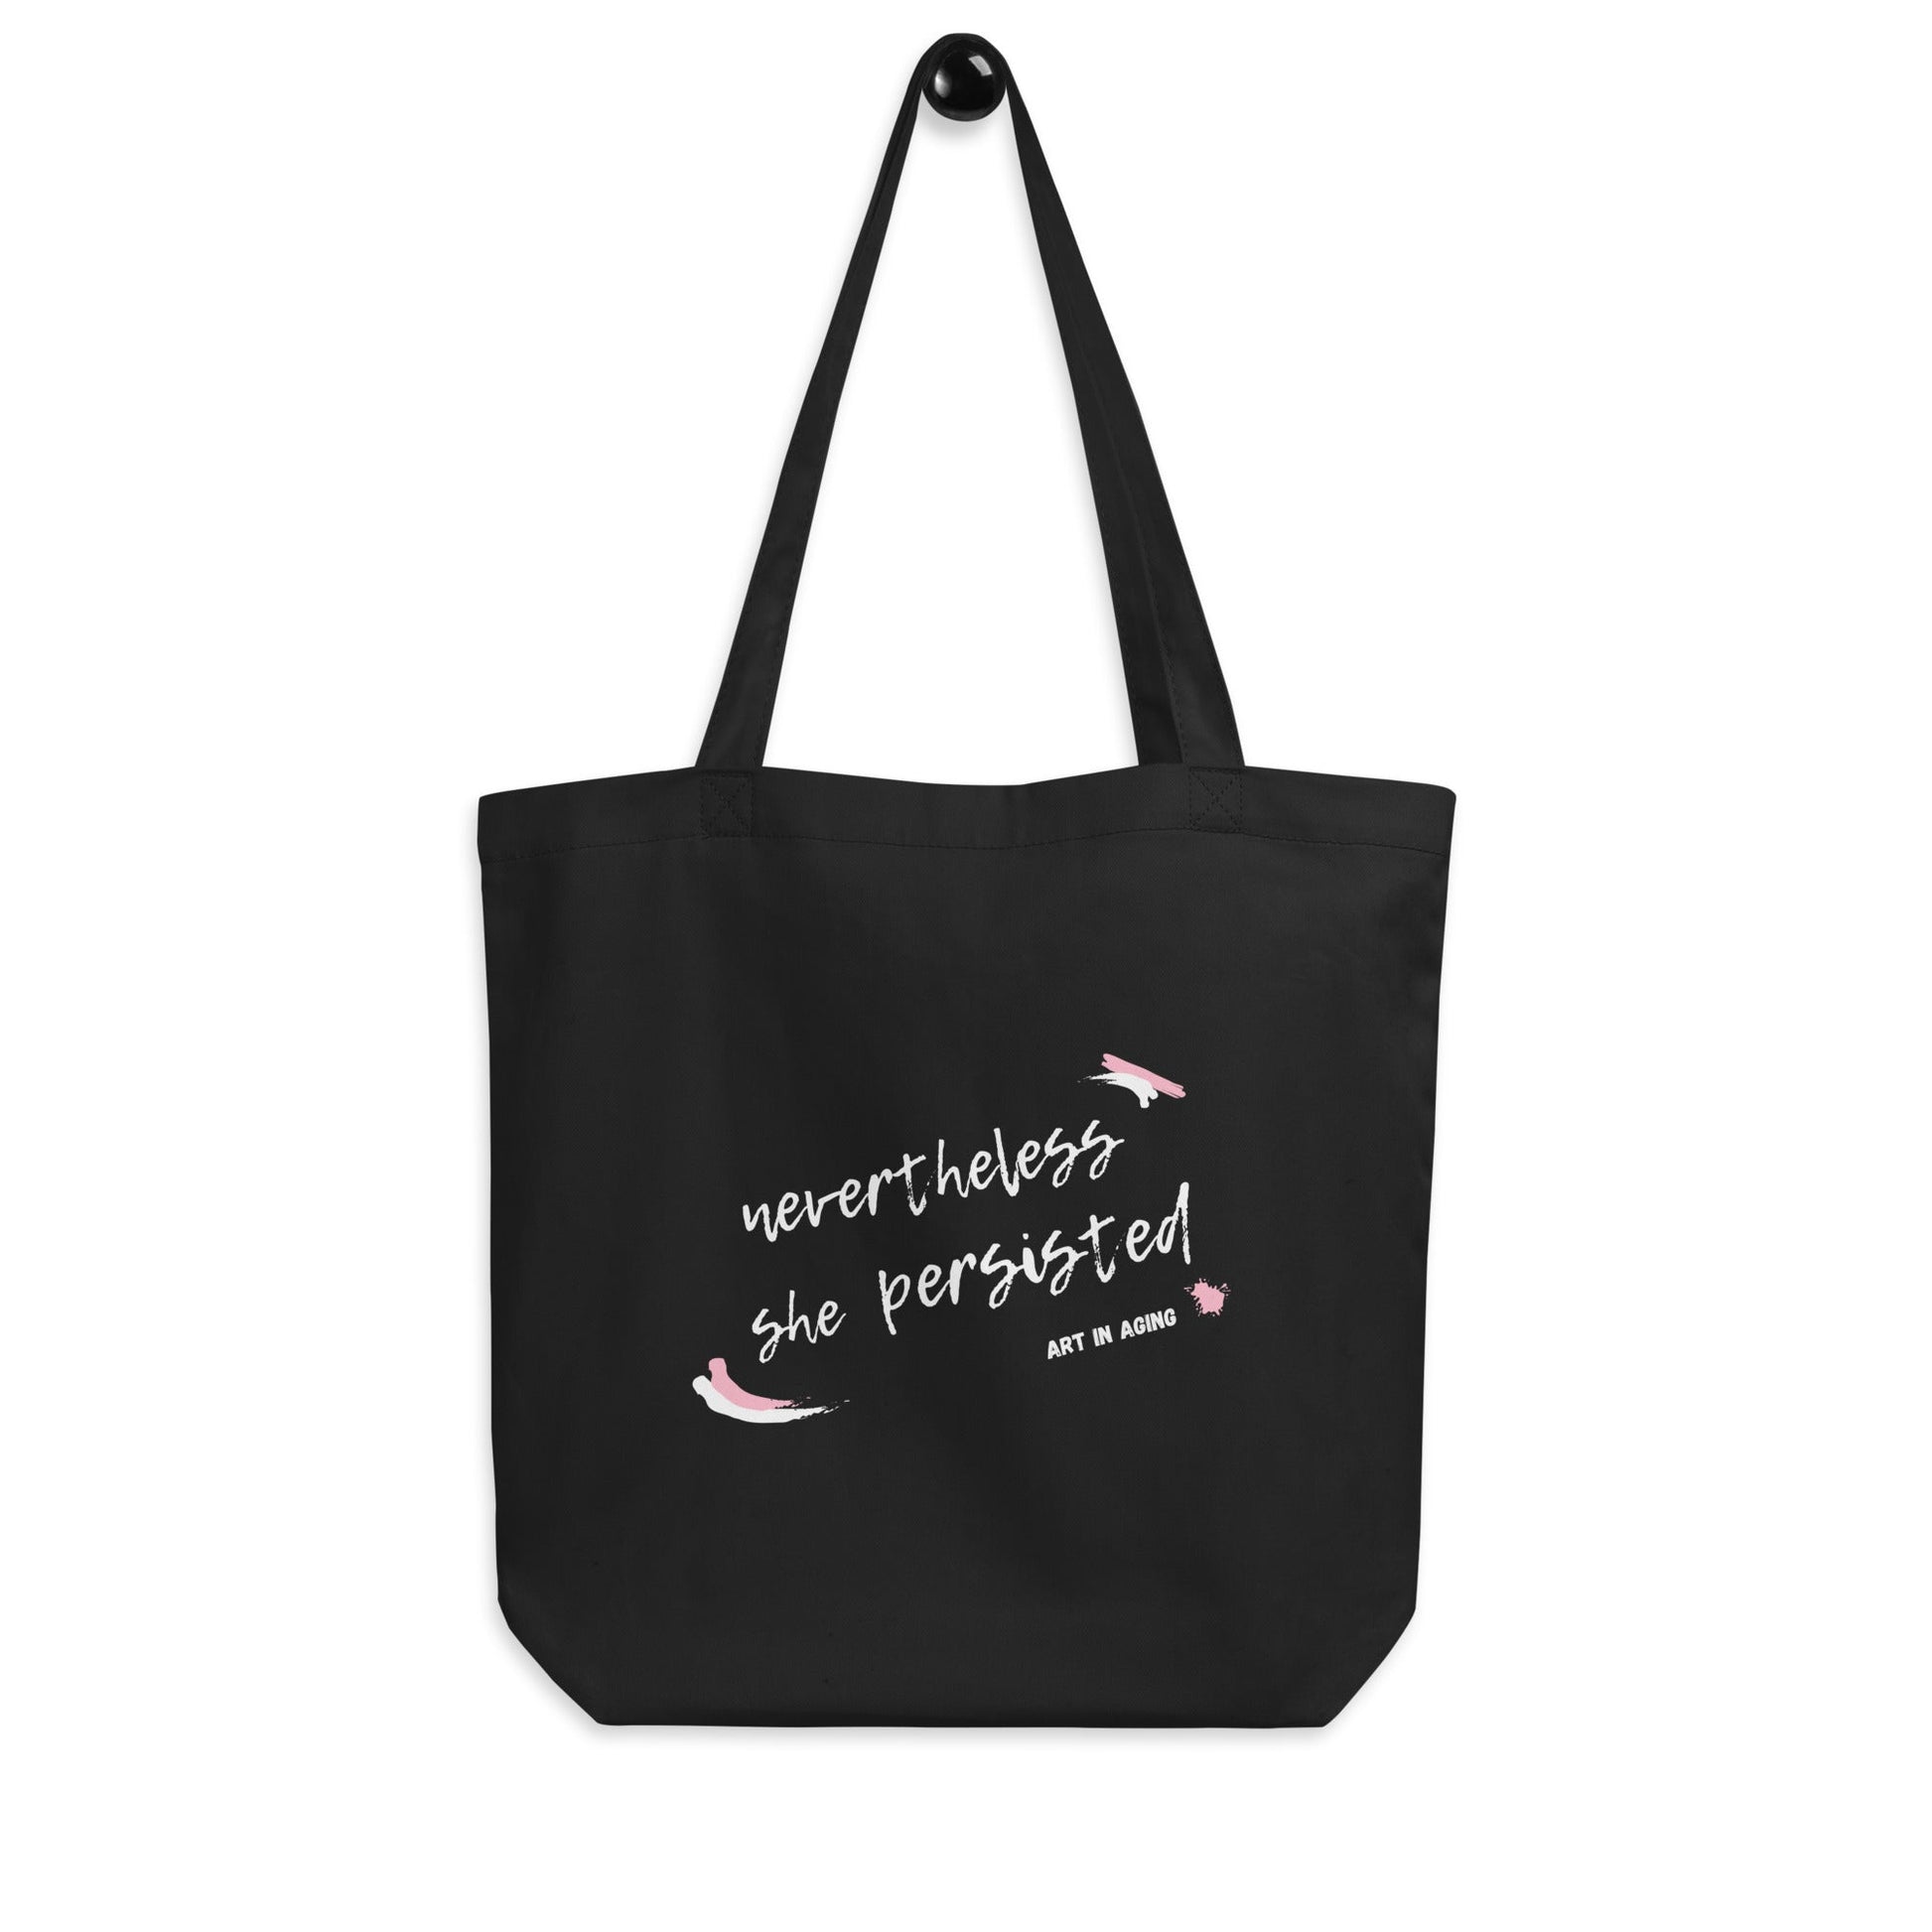 Nevertheless She Persisted Tote Bag | Art in Aging